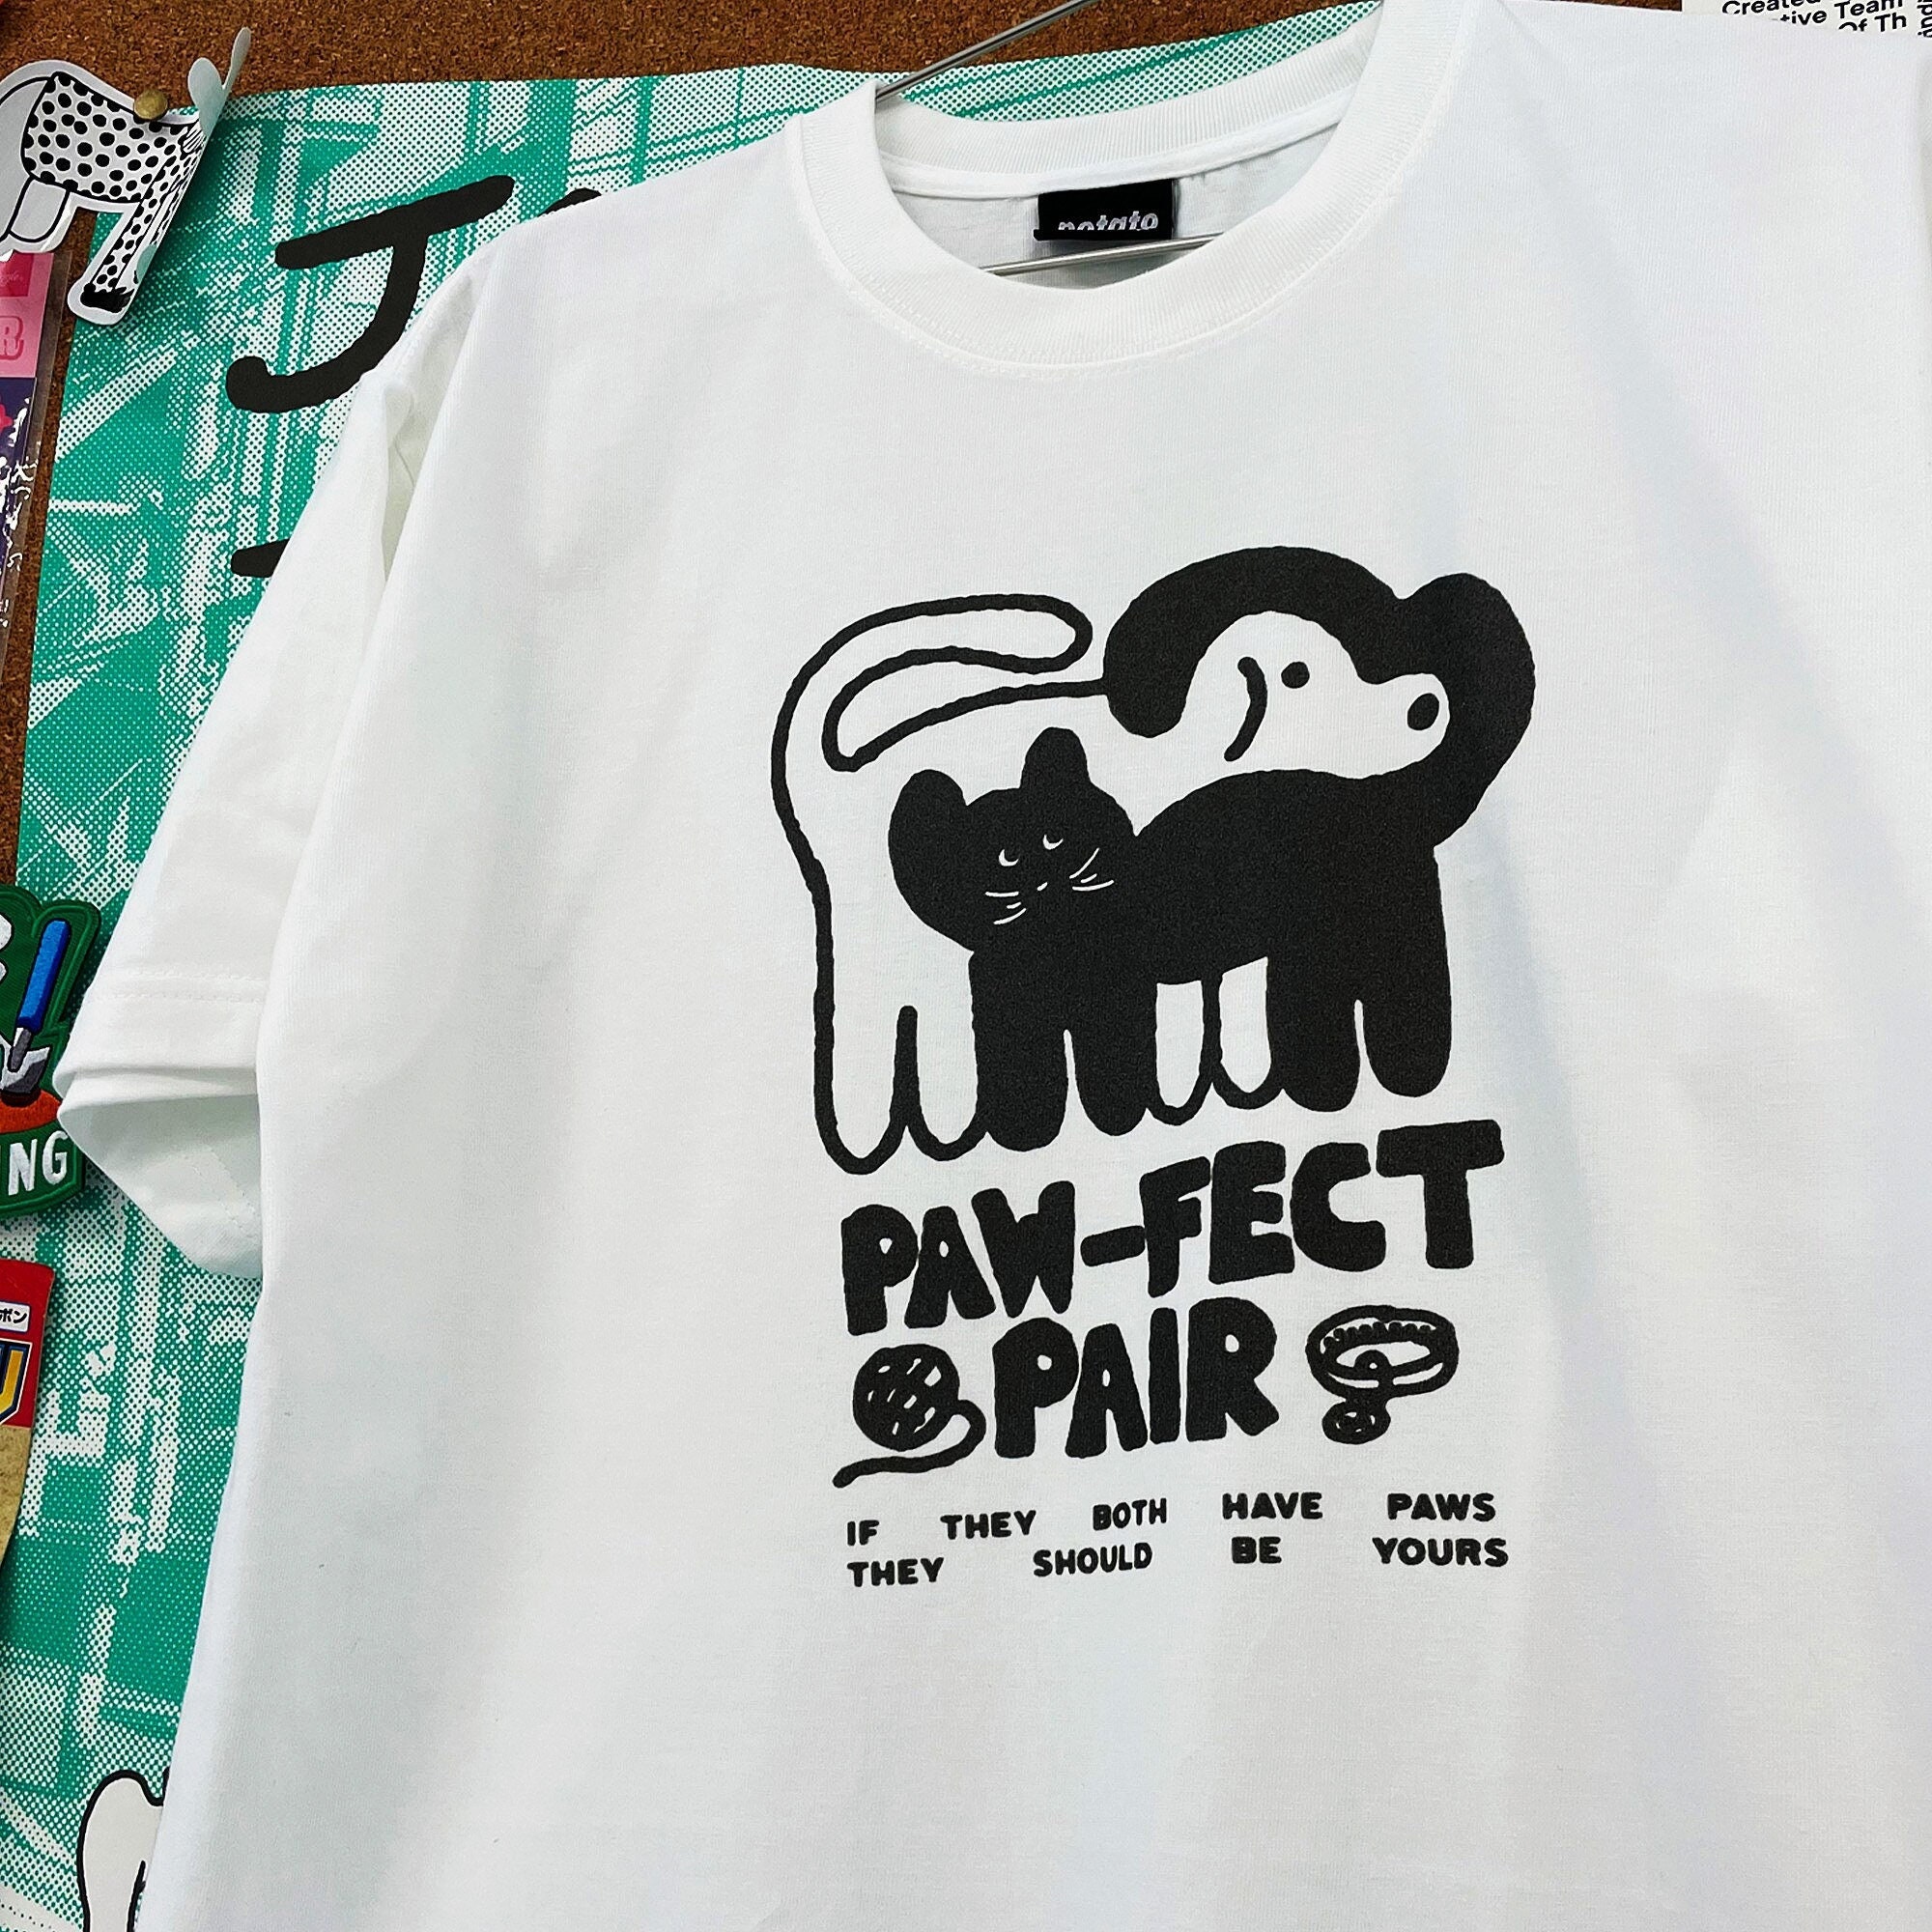 Y2K Vintage Style Graphic Tee: Paw-fect Pair Summer T Shirt for Women, Ideal Gift for Dog and Cat Lovers